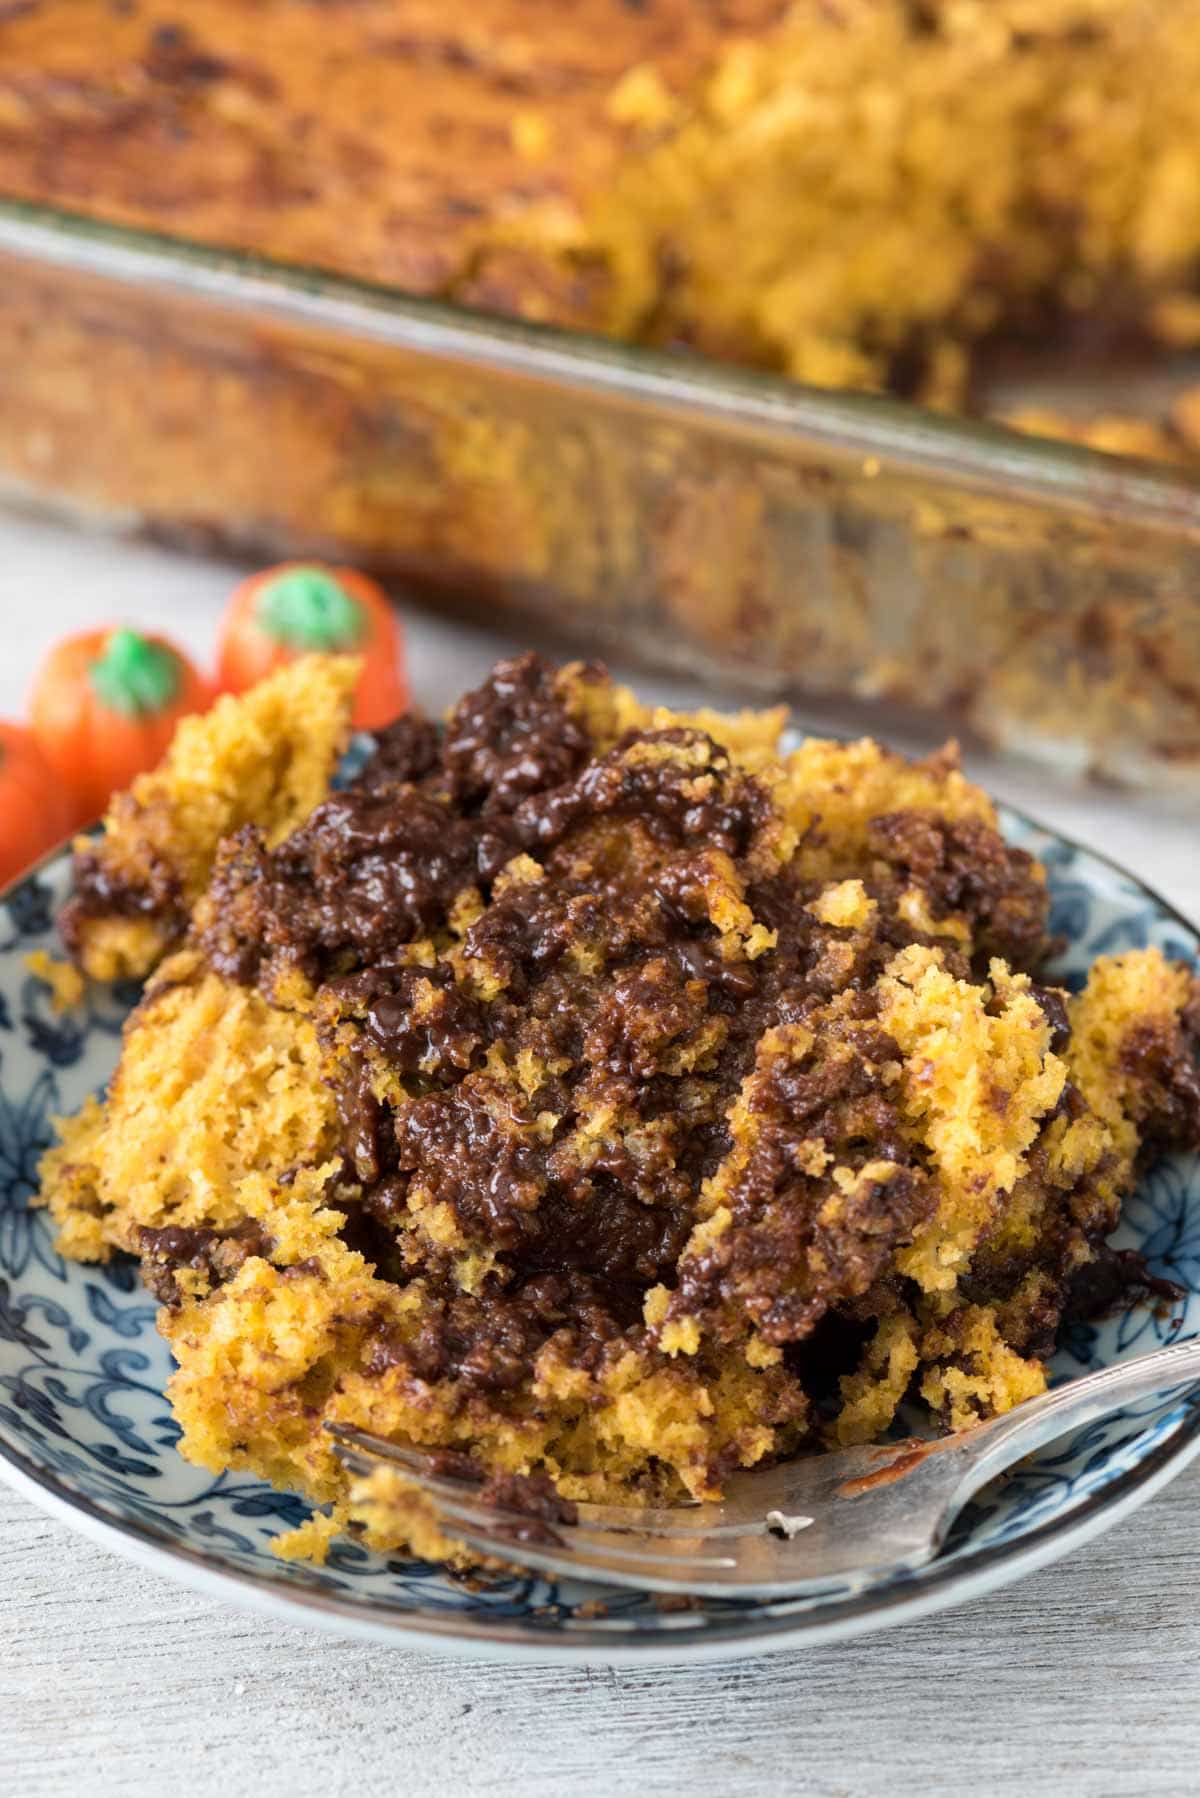 Pumpkin Hot Fudge Pudding Cake - this easy pumpkin cake recipe starts with a cake mix and is baked with chocolate that turns into hot fudge pudding!